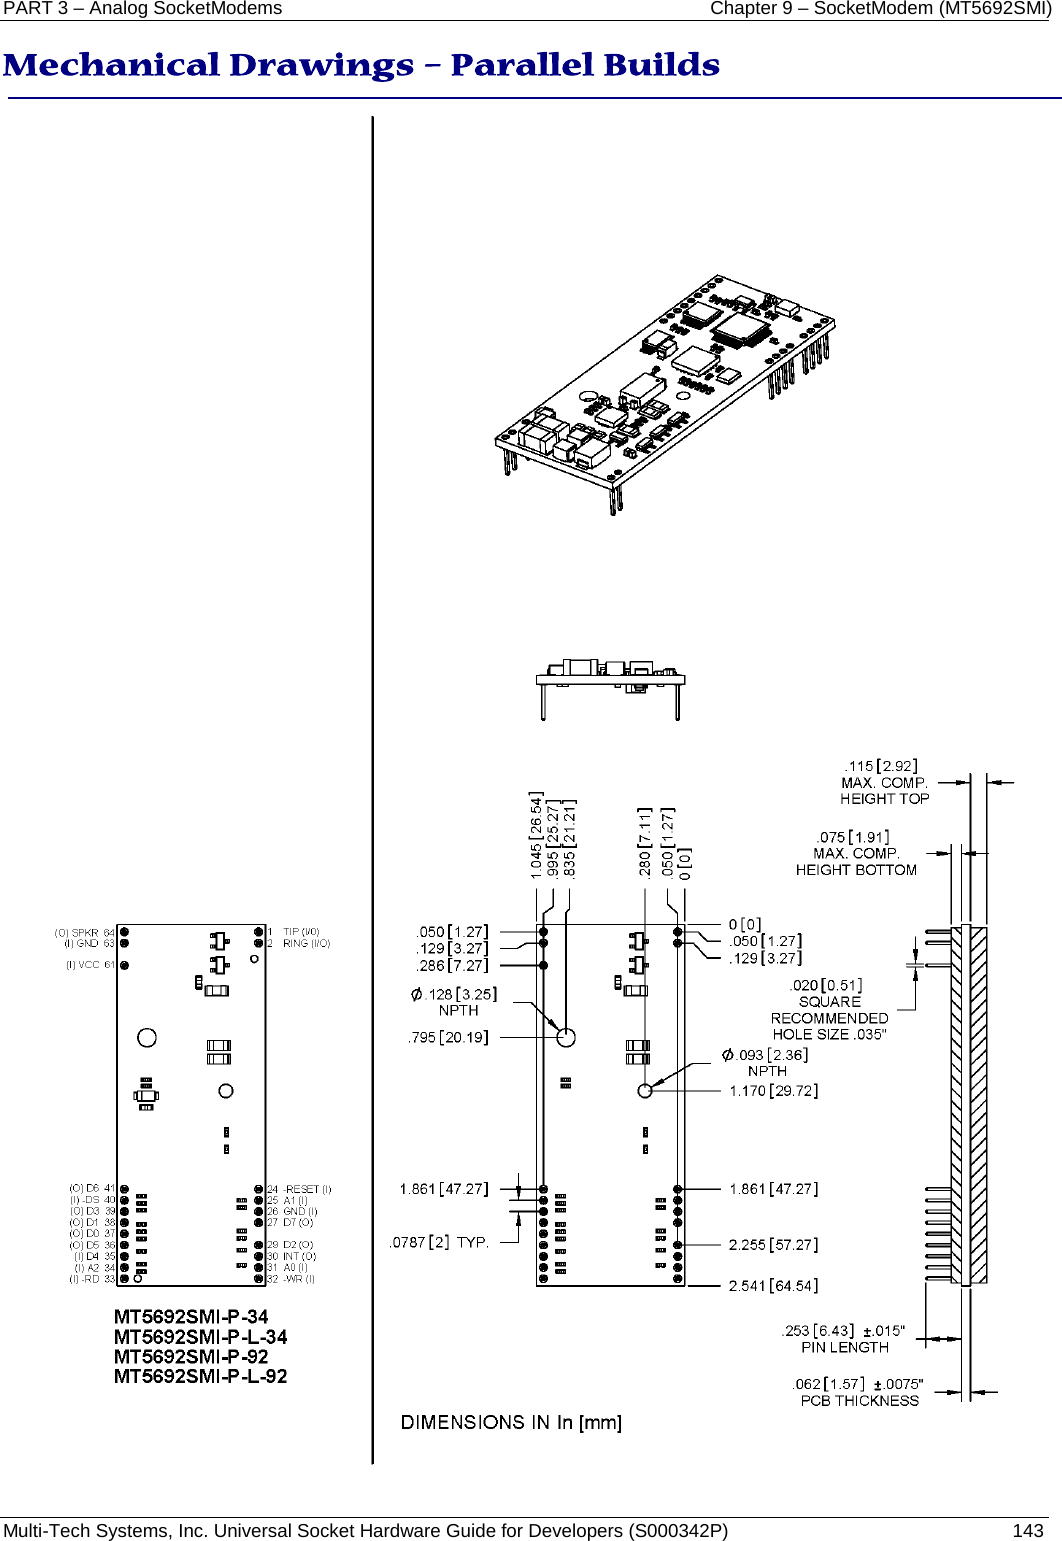 PART 3 – Analog SocketModems    Chapter 9 – SocketModem (MT5692SMI) Multi-Tech Systems, Inc. Universal Socket Hardware Guide for Developers (S000342P)  143  Mechanical Drawings – Parallel Builds      